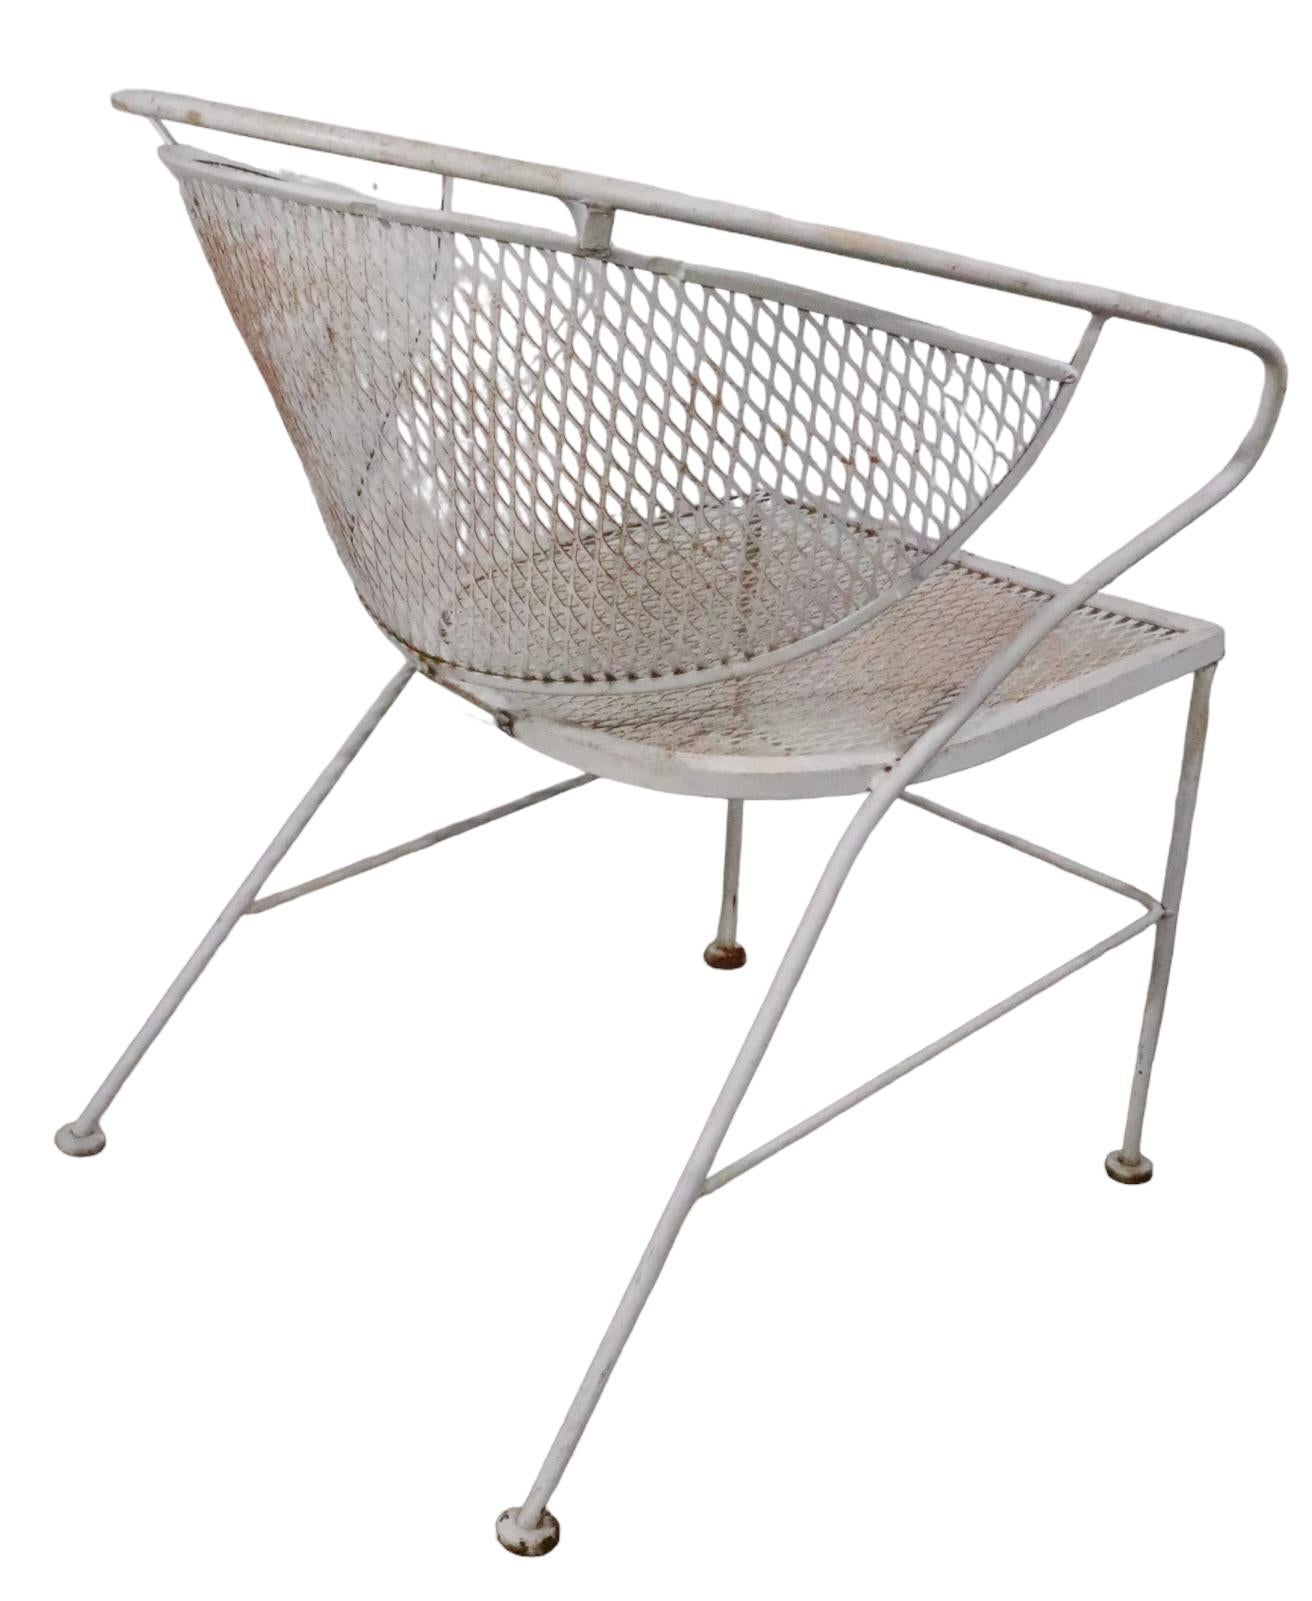 American Wrought Iron and Metal Mesh Garden Side, Dining Chair by Salterini, C 1950s For Sale